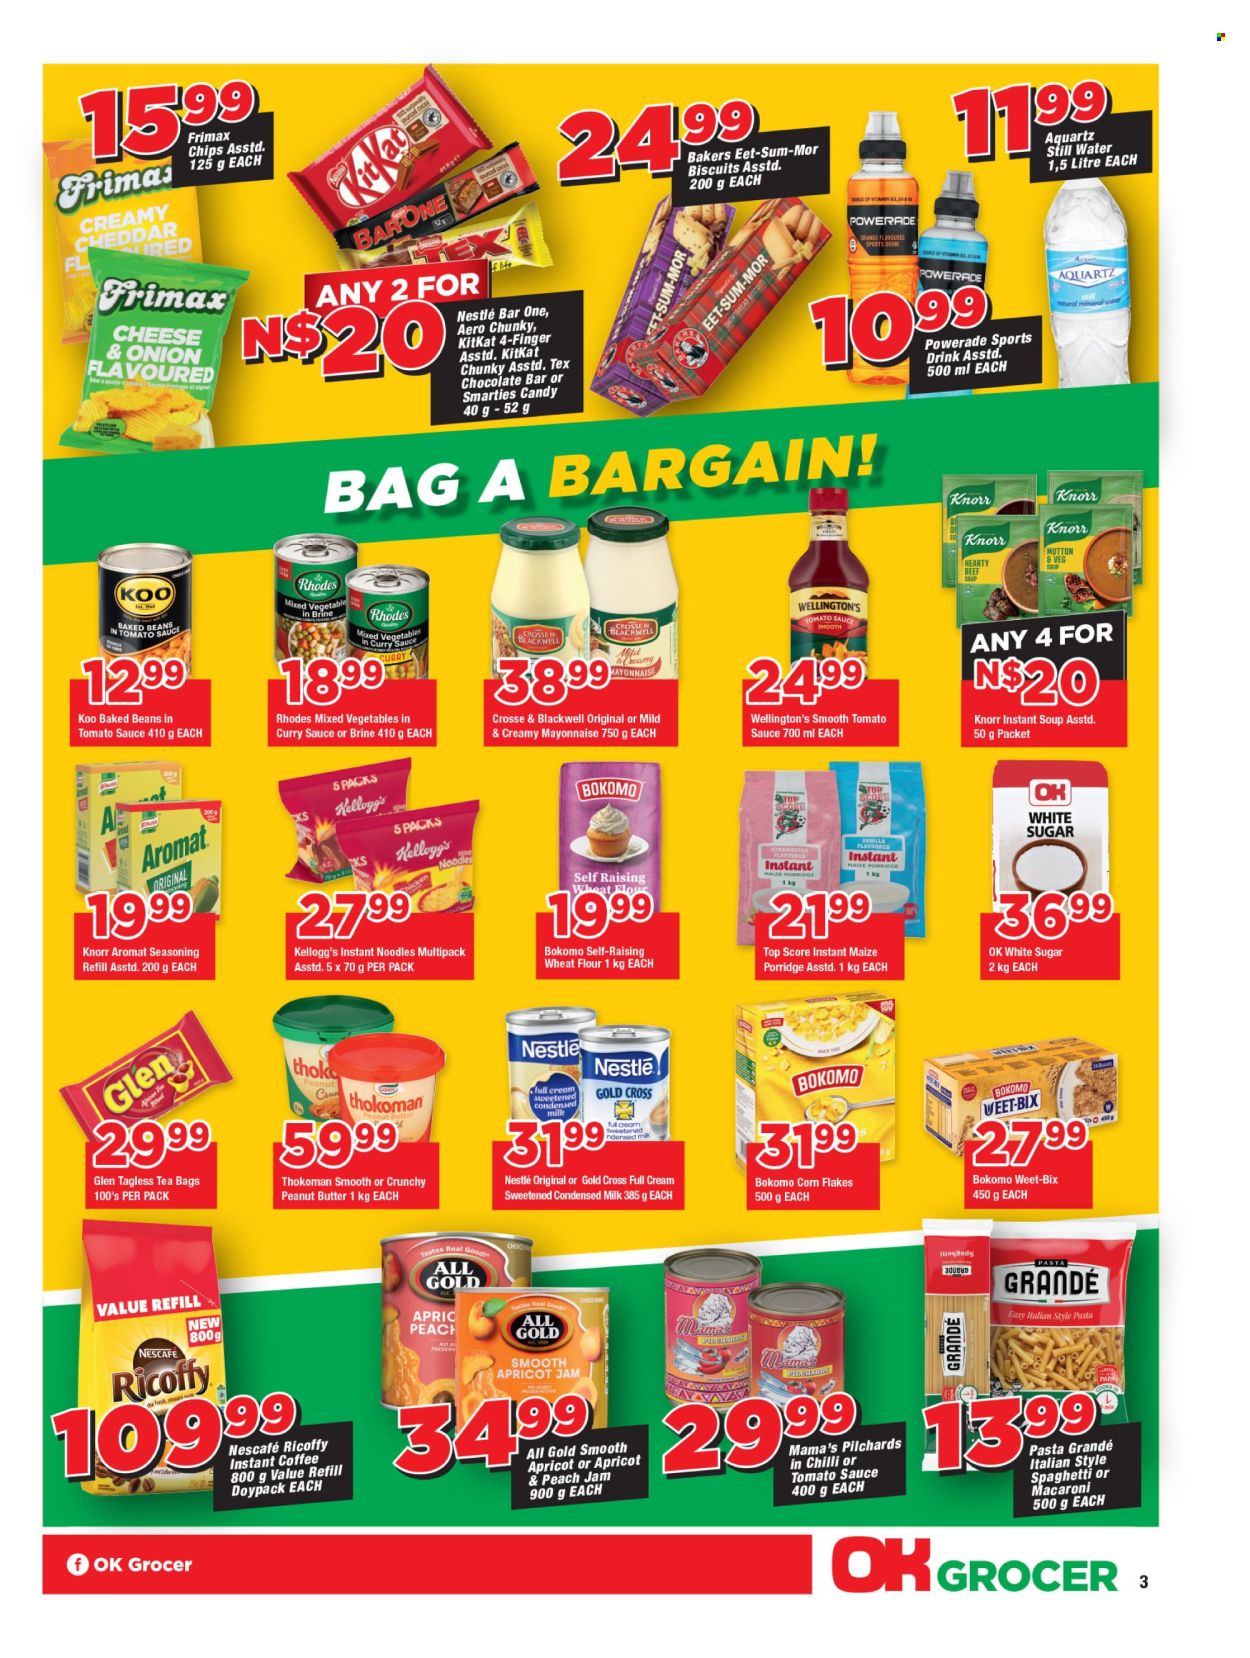 thumbnail - OK catalogue  - 19/04/2024 - 05/05/2024 - Sales products - mixed vegetables, sardines, spaghetti, macaroni, condensed soup, soup, pasta, instant noodles, Knorr, noodles, instant soup, Mama's, ready meal, condensed milk, mayonnaise, frozen vegetables, Nestlé, chocolate wafer, KitKat, Smarties, cereal bar, Kellogg's, biscuit, chocolate bar, Candy, flour, sugar, wheat flour, baked beans, Koo, corn flakes, Weet-Bix, porridge, instant porridge, Pasta Grandé, spice, seasoning, curry sauce, apricot jam, fruit jam, peanut butter, jam, Powerade, energy drink, electrolyte drink, mineral water, water, still water, tea bags, coffee, instant coffee, Ricoffy, Nescafé, mutton meat. Page 3.